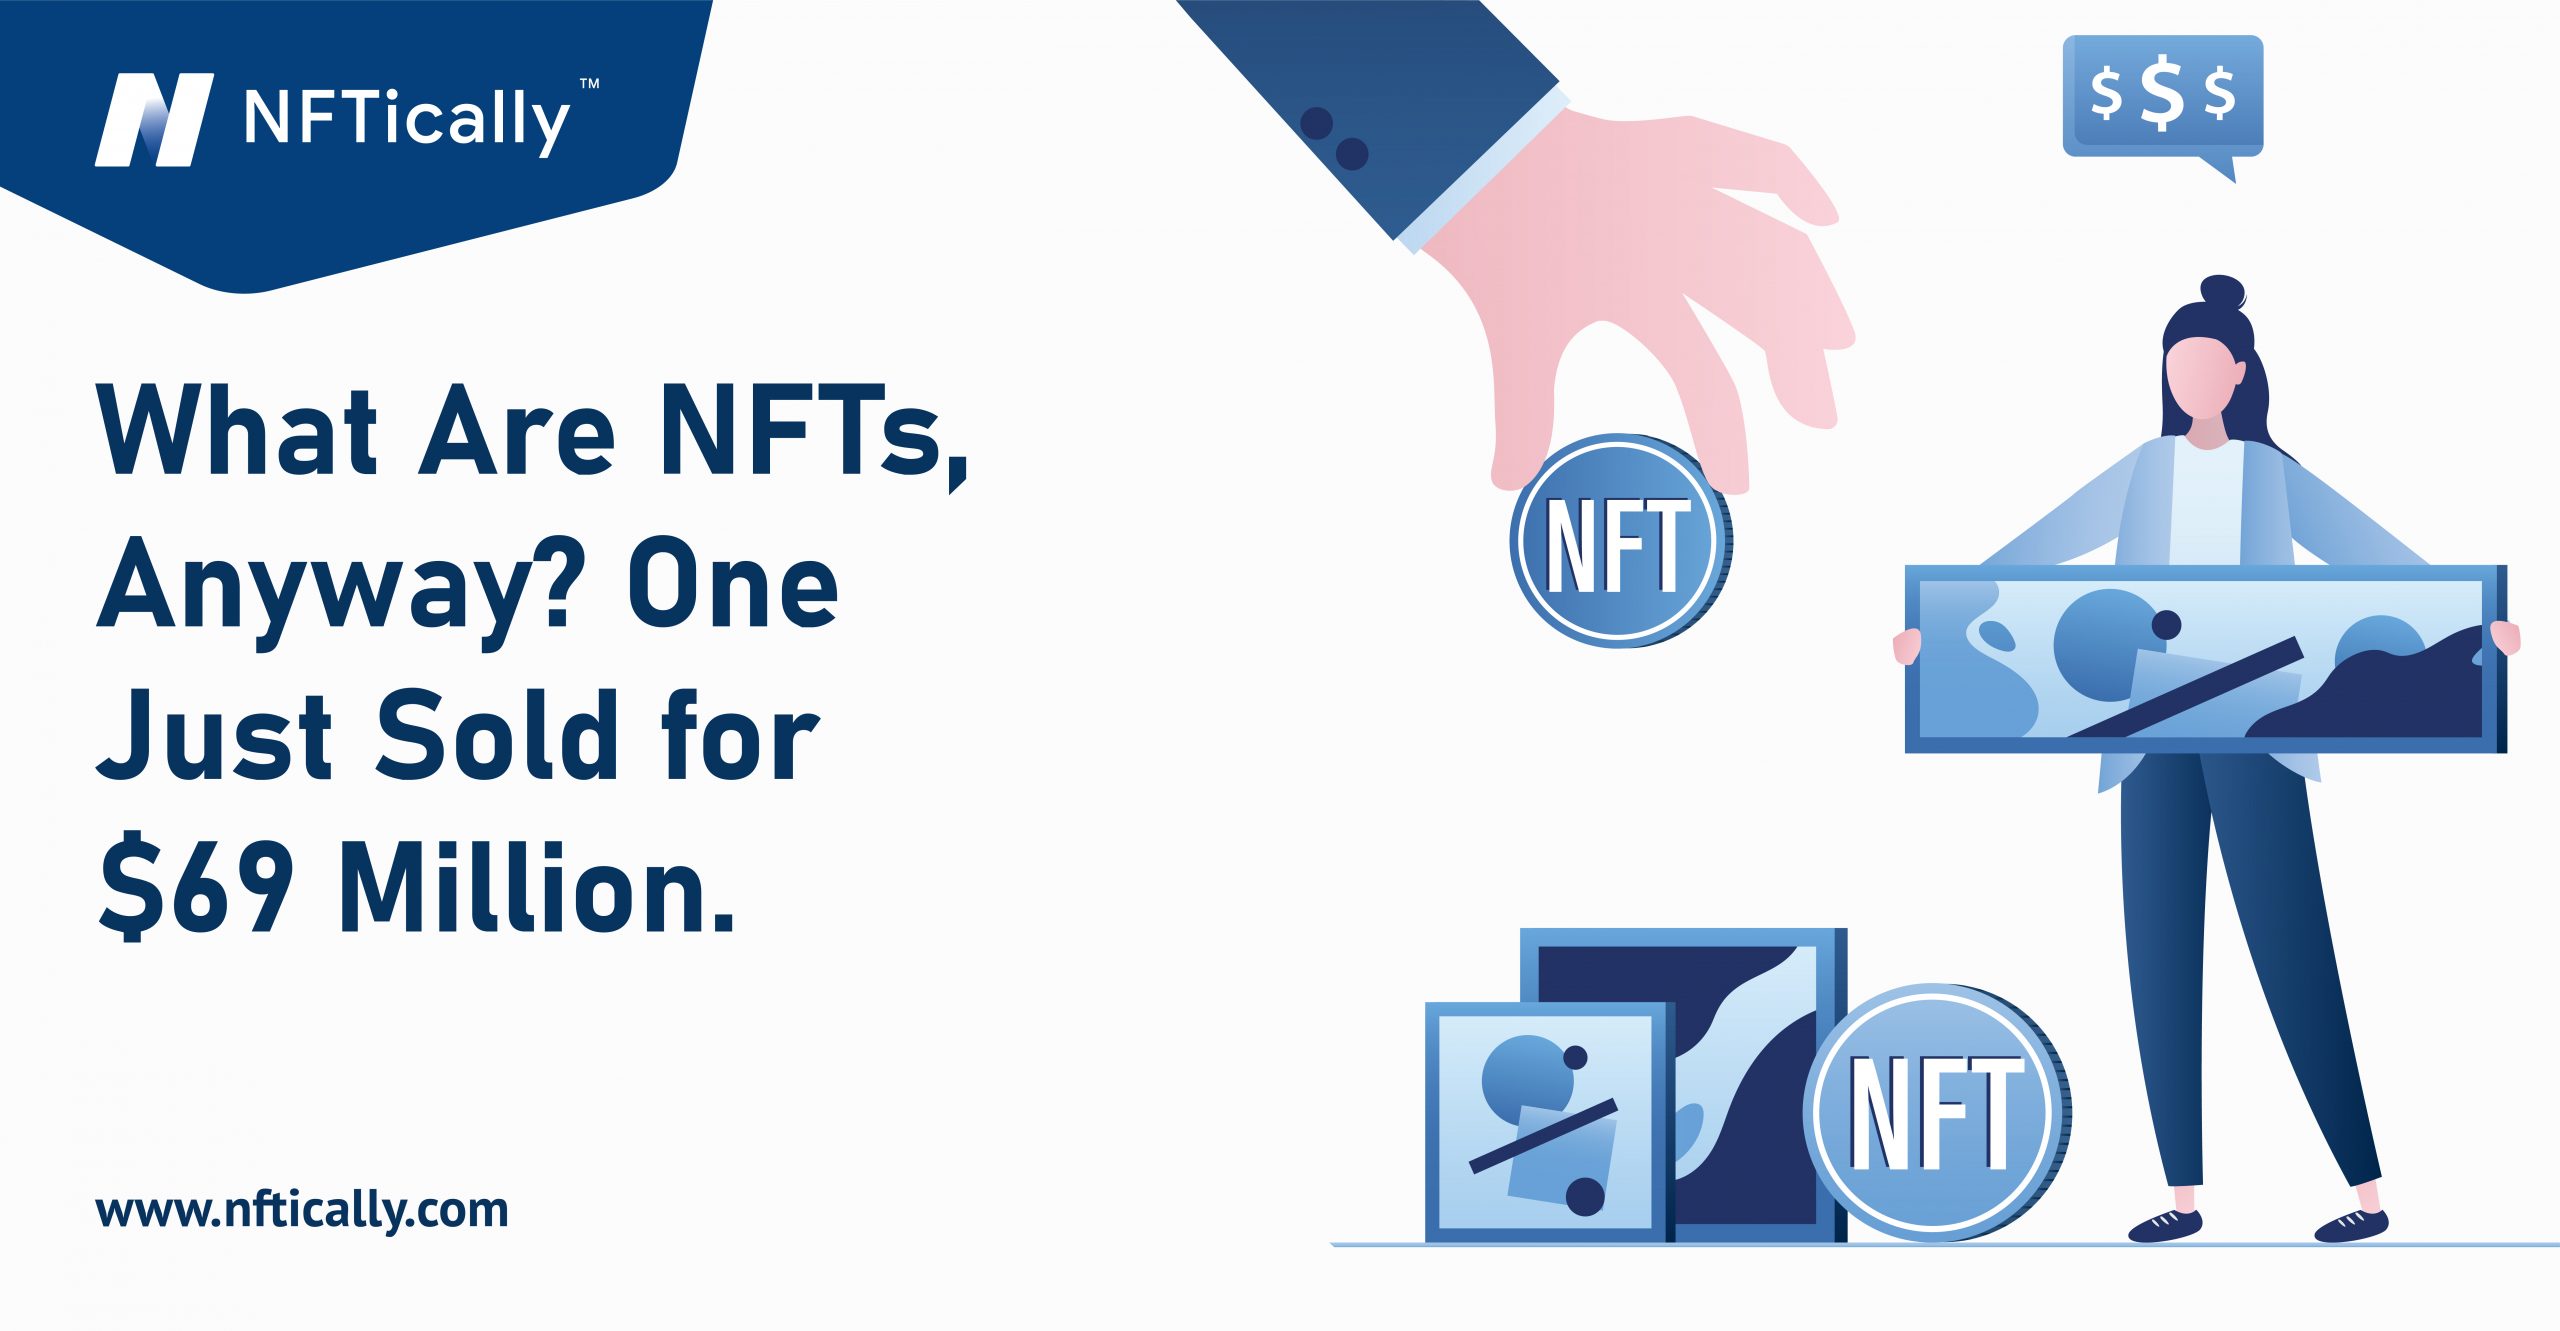 What Are NFTs, Anyway? One Just Sold for $69 Million.